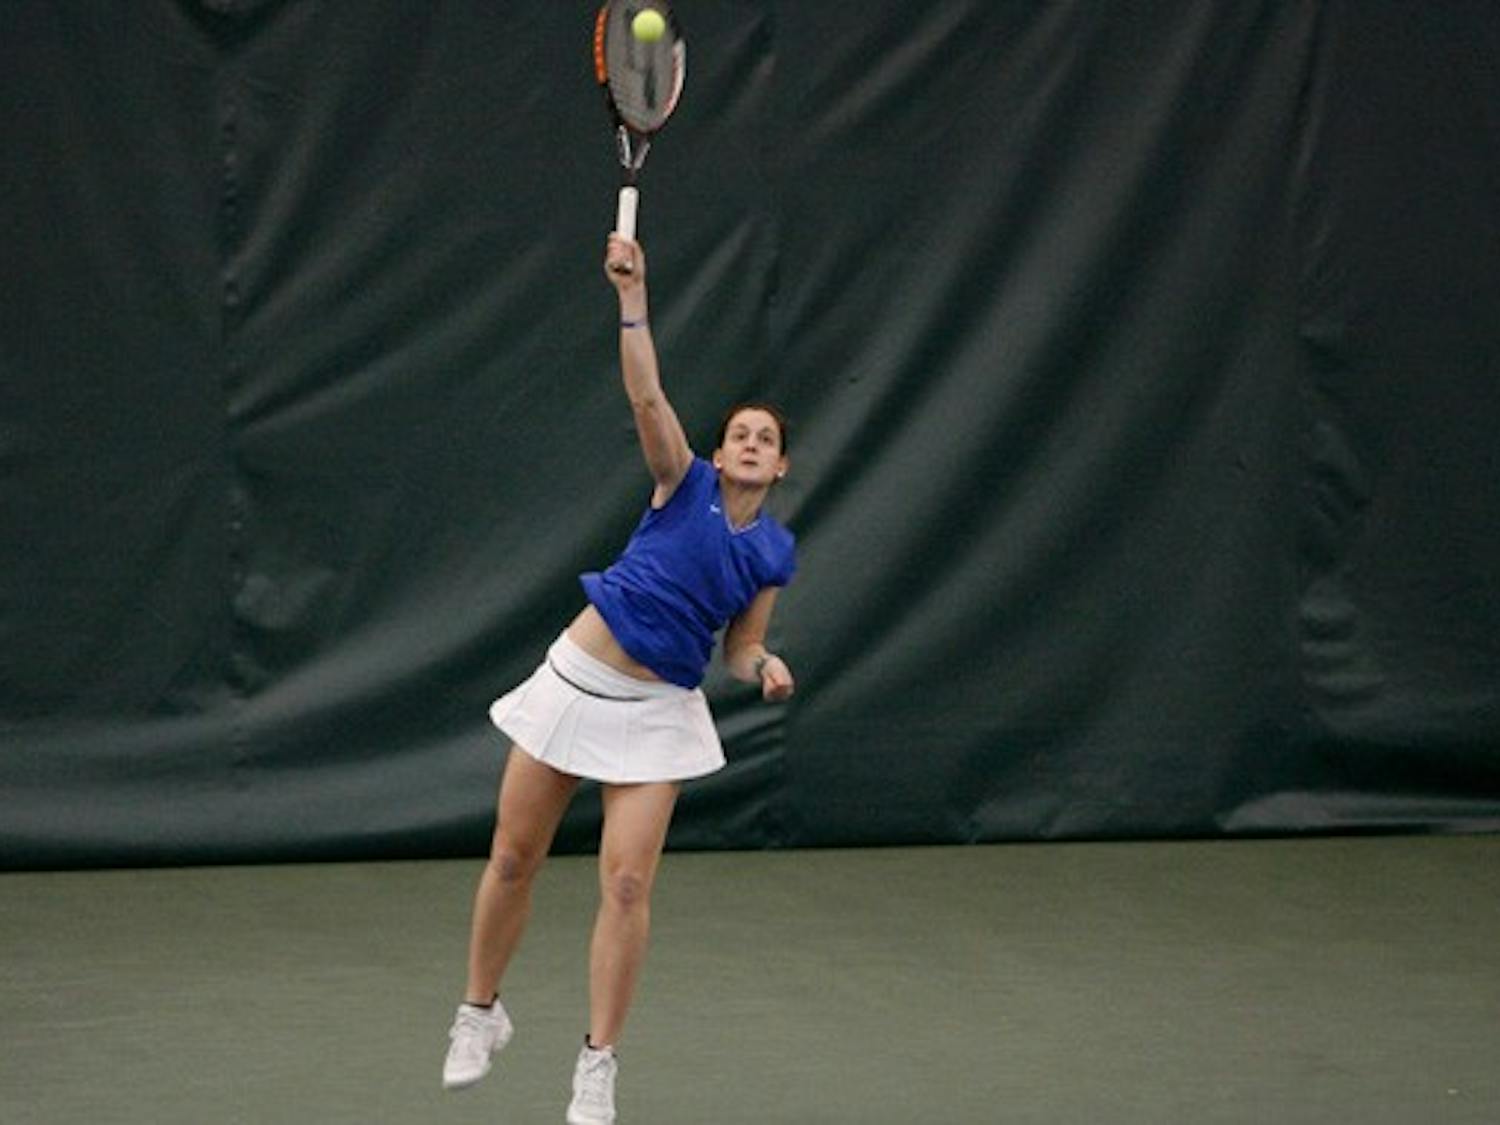 No. 1 Duke extended its winning streak and remained unbeaten on the season this weekend, sweeping Indiana 7-0 Saturday at Sheffield Tennis Center.